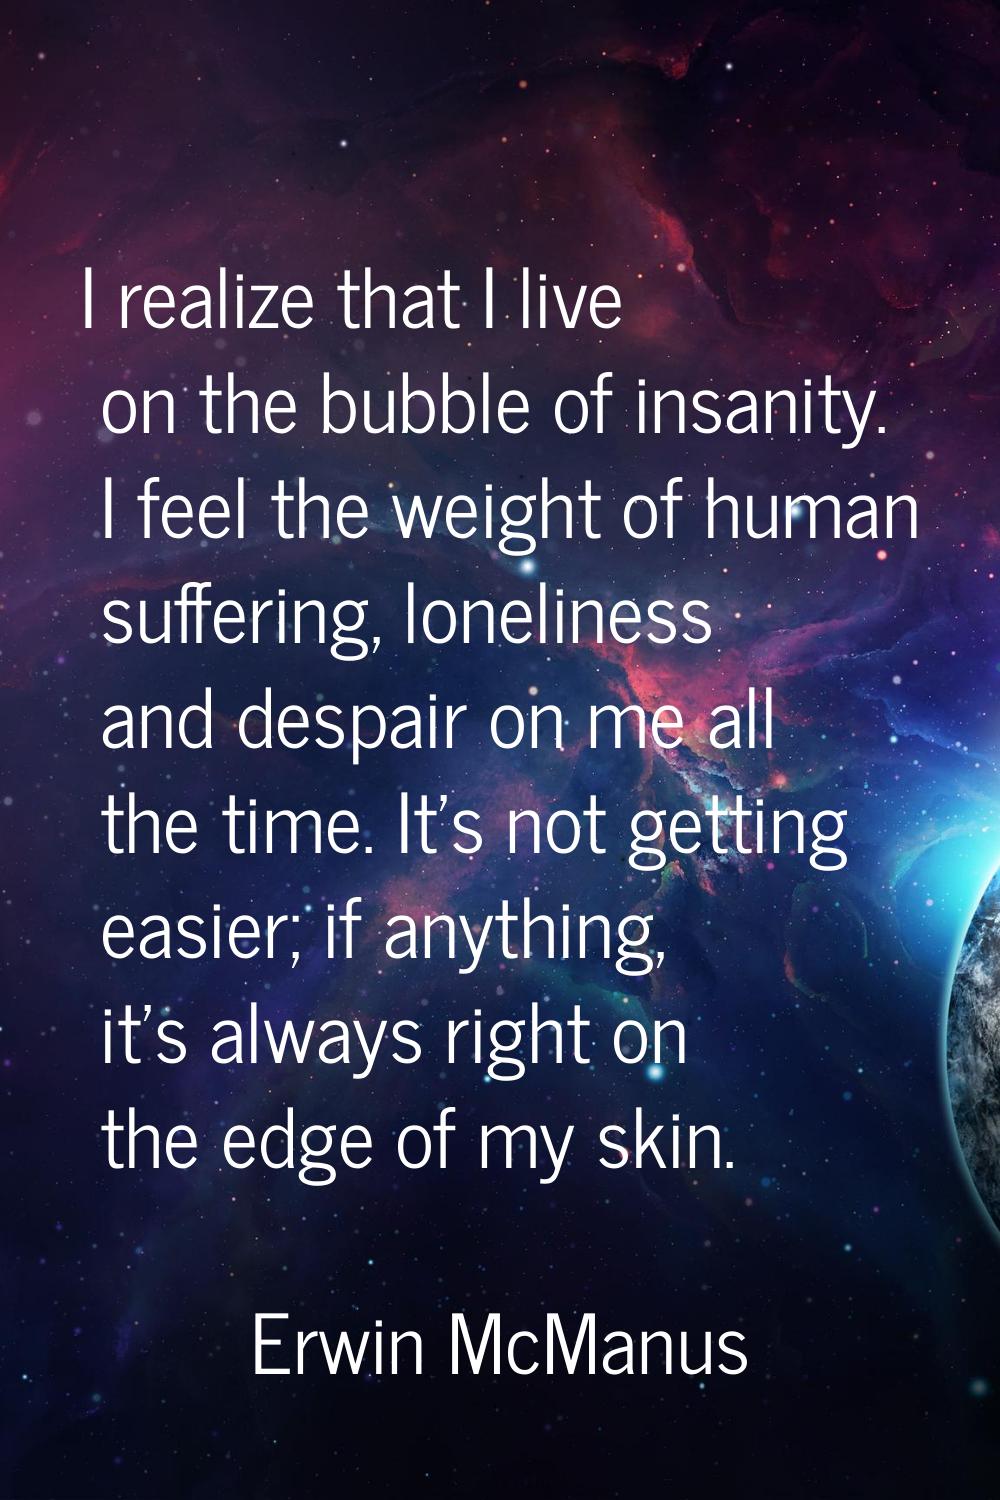 I realize that I live on the bubble of insanity. I feel the weight of human suffering, loneliness a